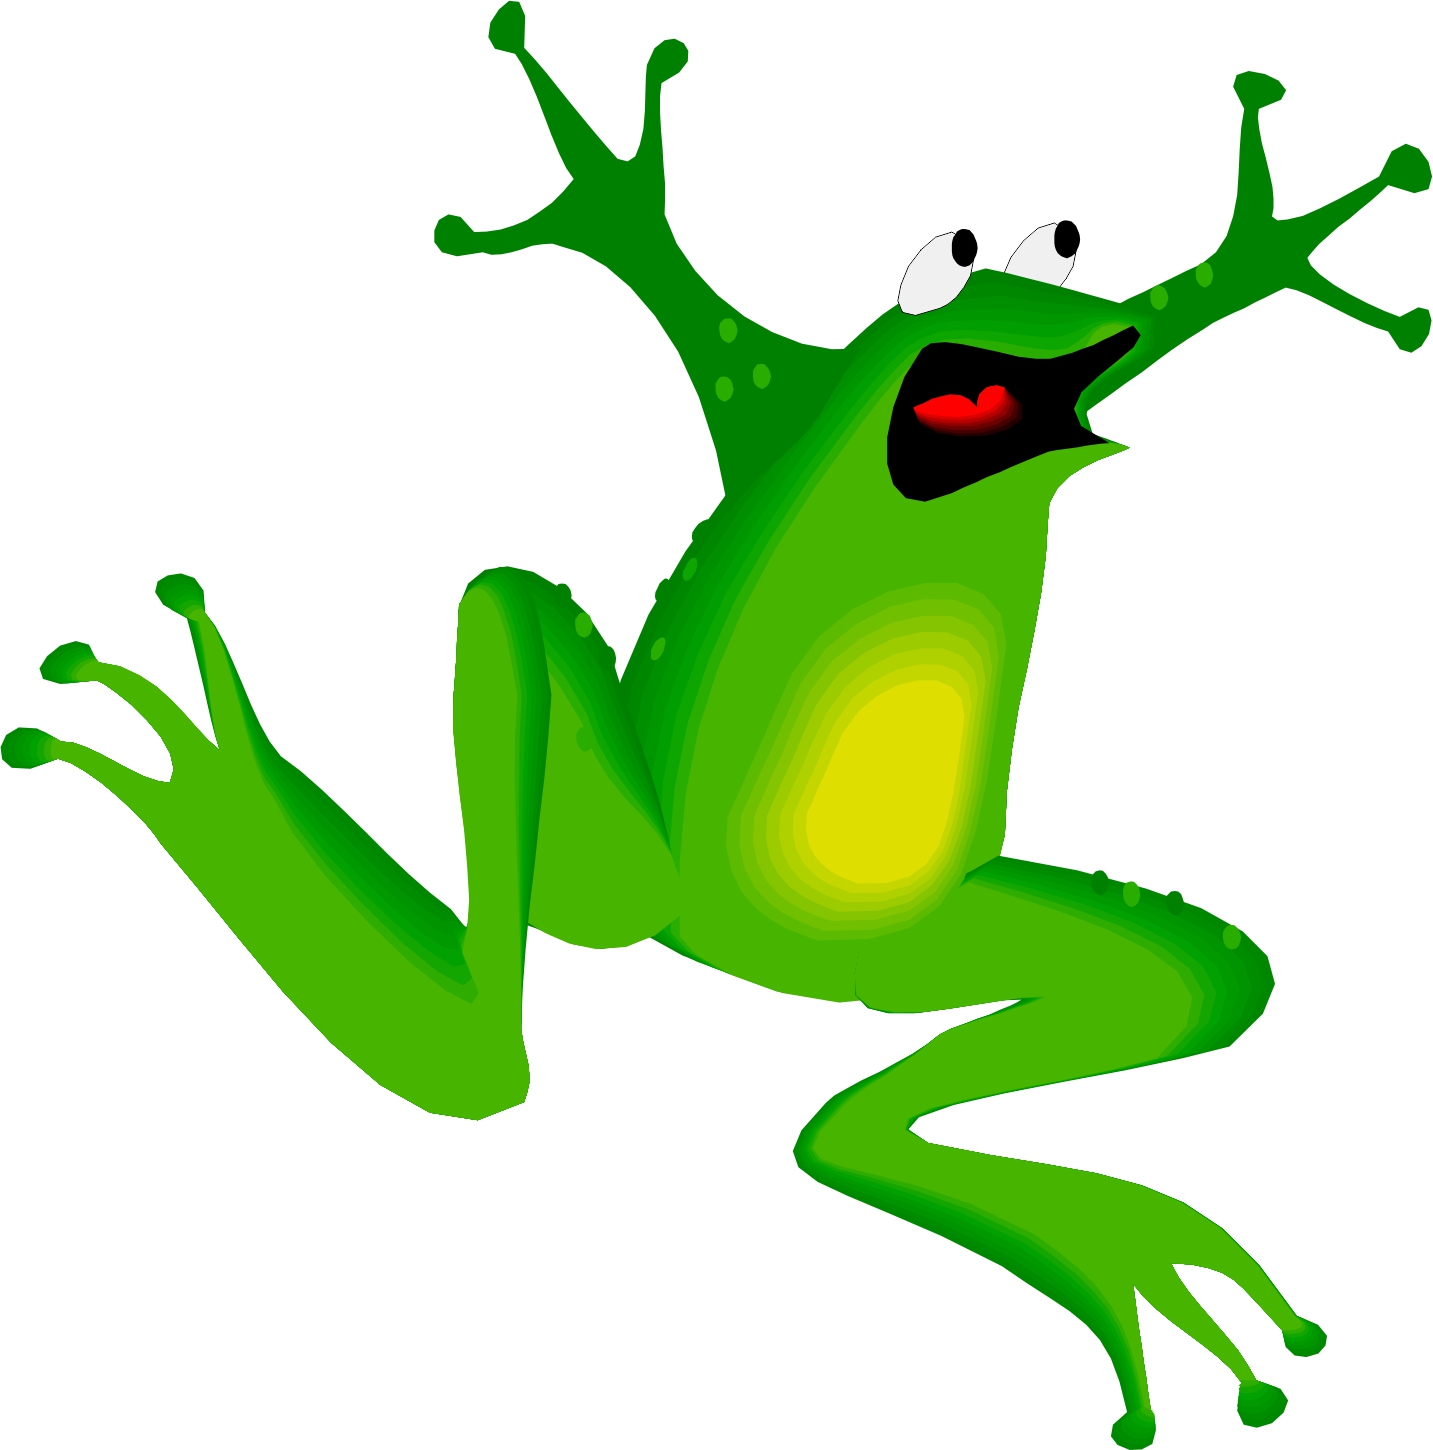 Hopping Frog PNG - 69478